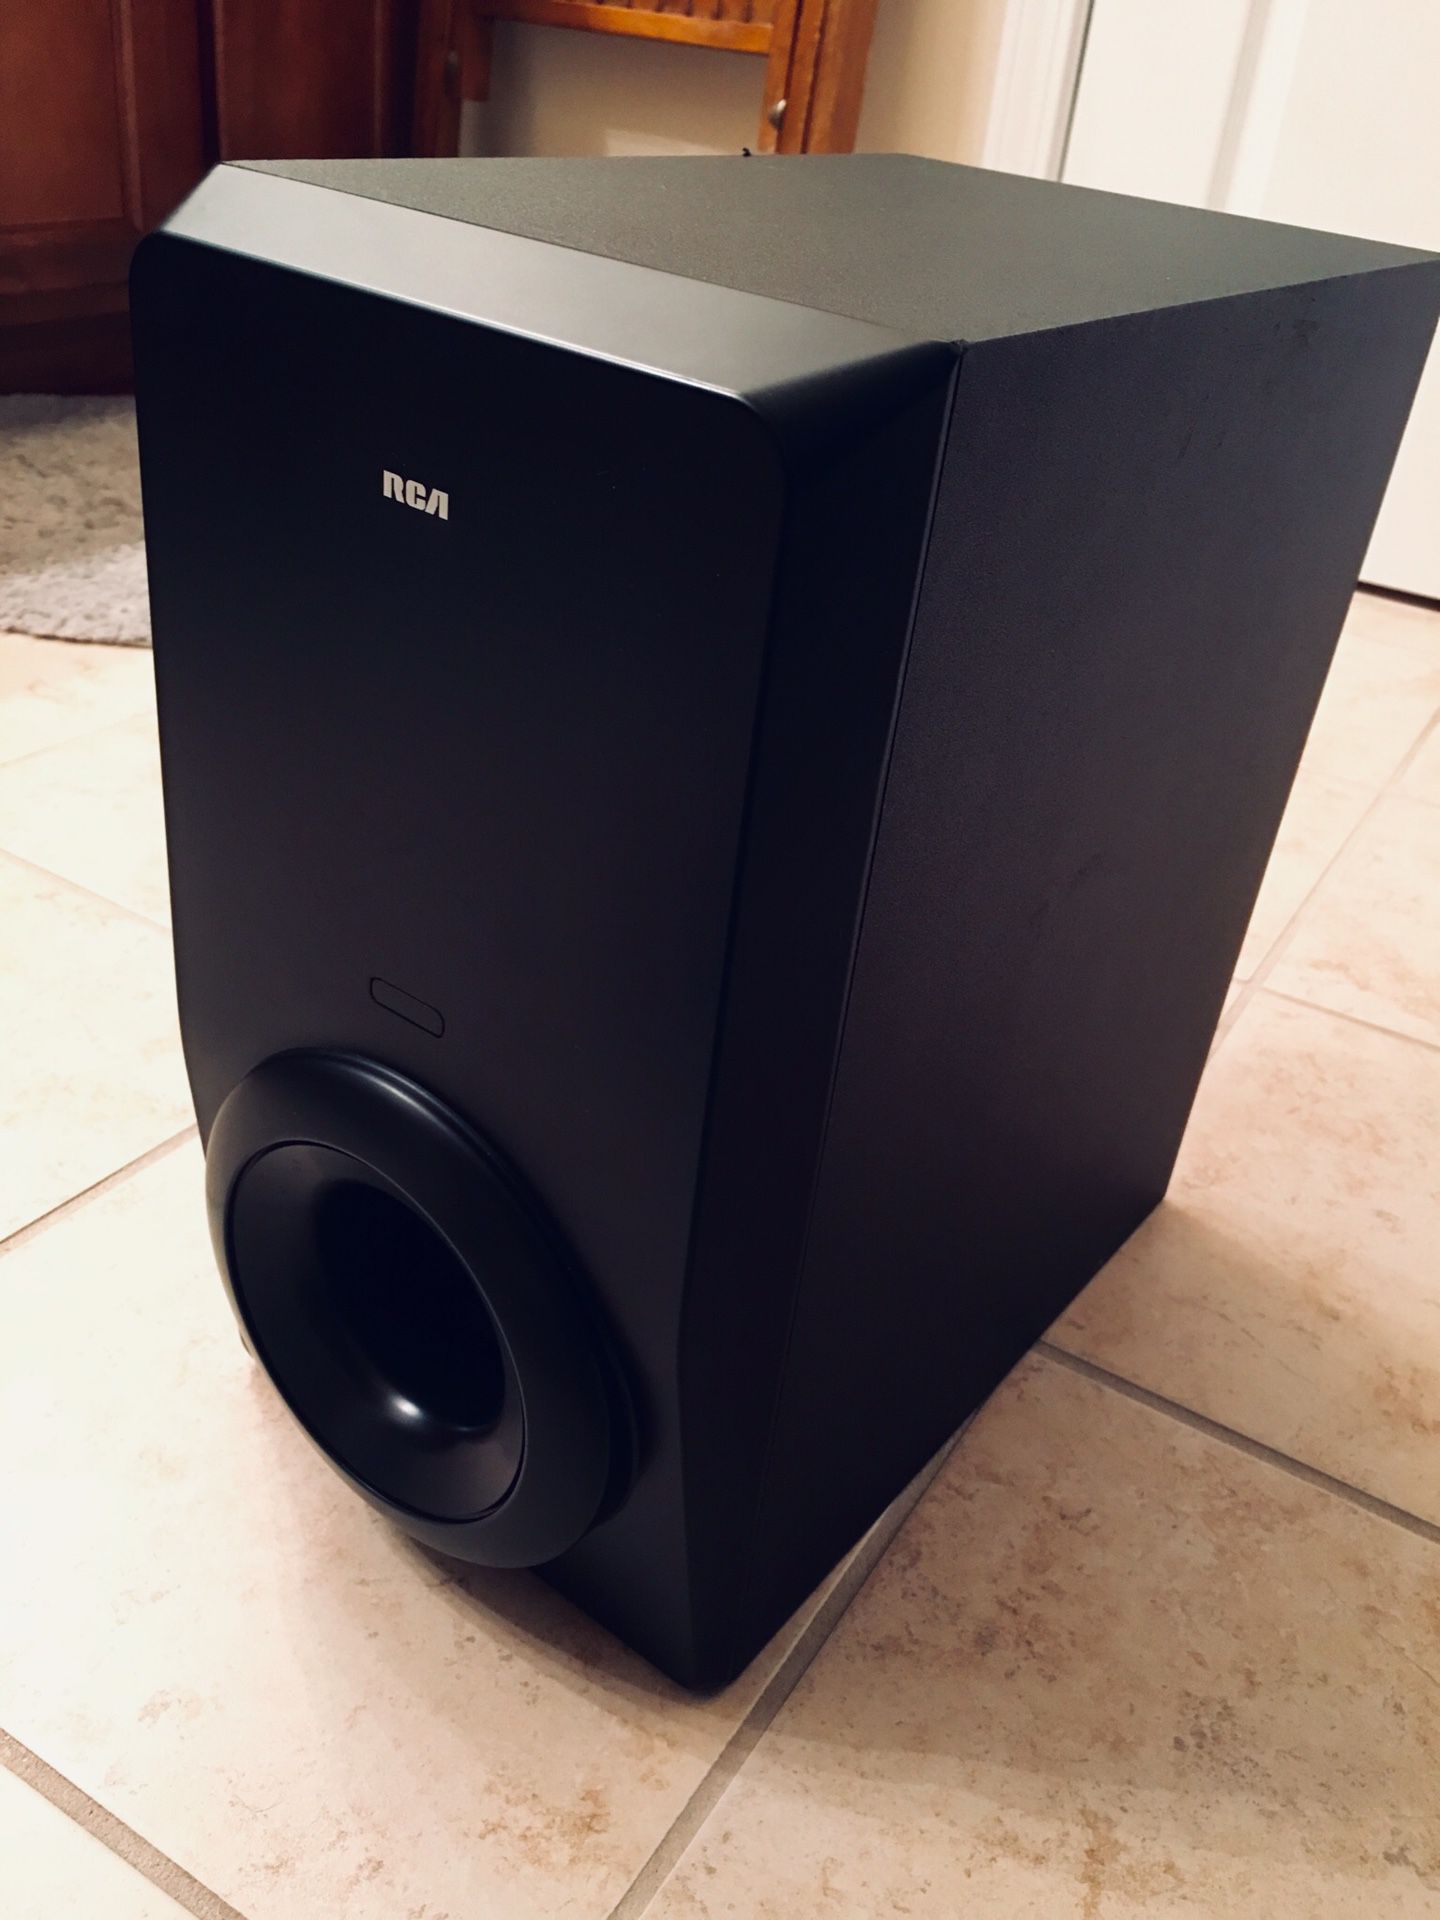 RCA RTD615i 120w Surround Sound Home Theater Sub Bass Subwoofer Speaker